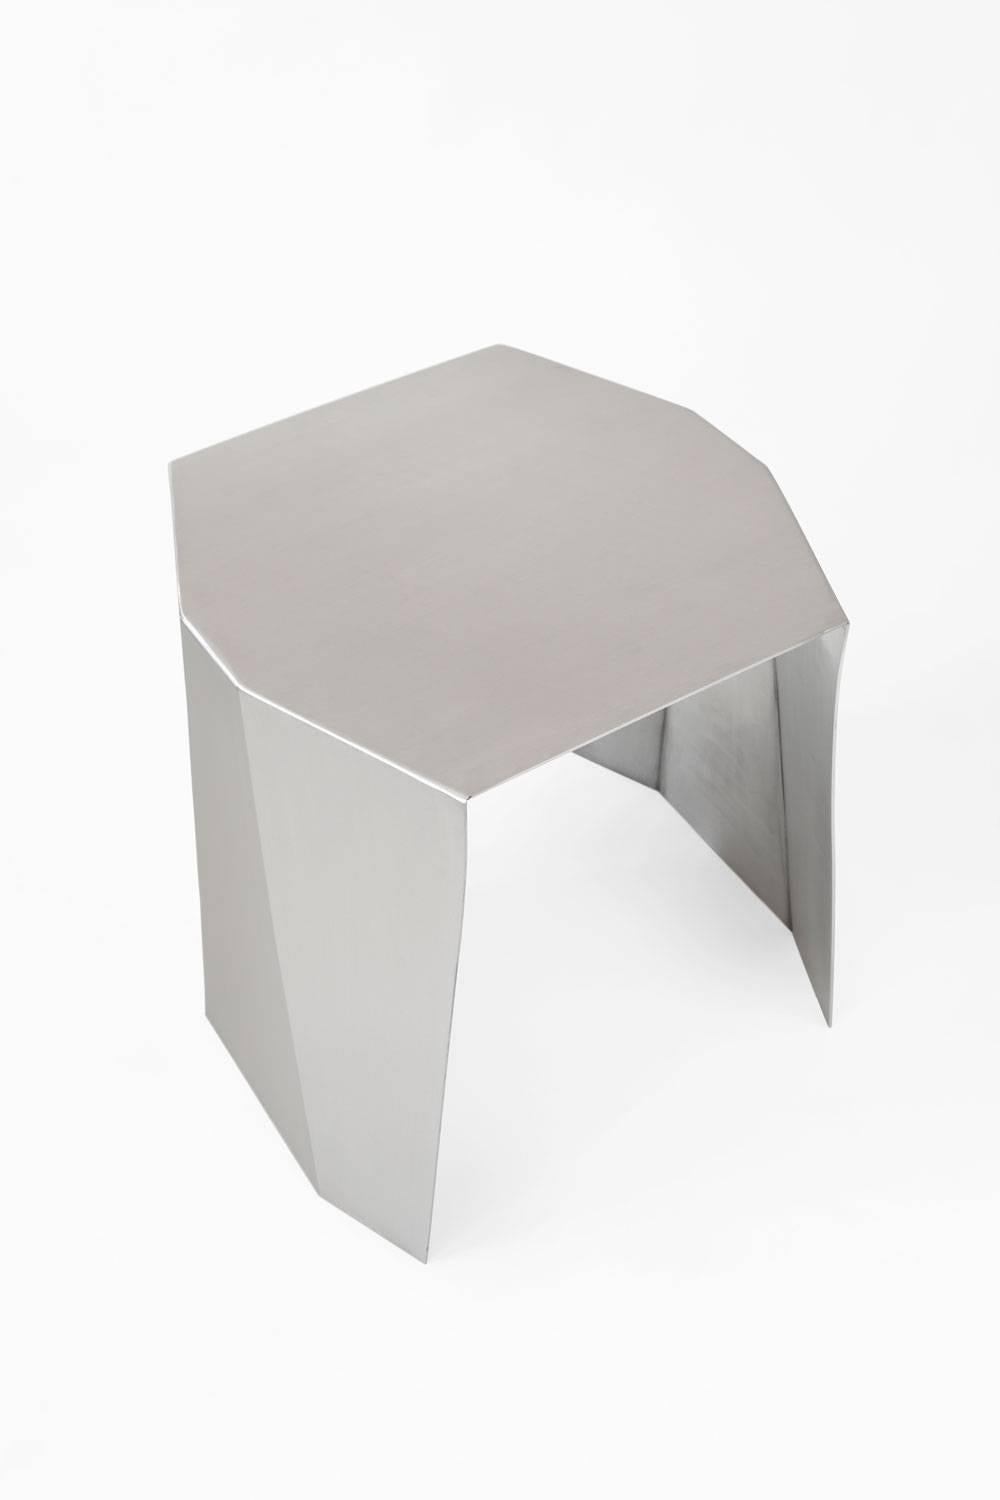 Modern Adolfo Abejon Contemporary Stainless Steel Katy Limited Edition Sculpture Table